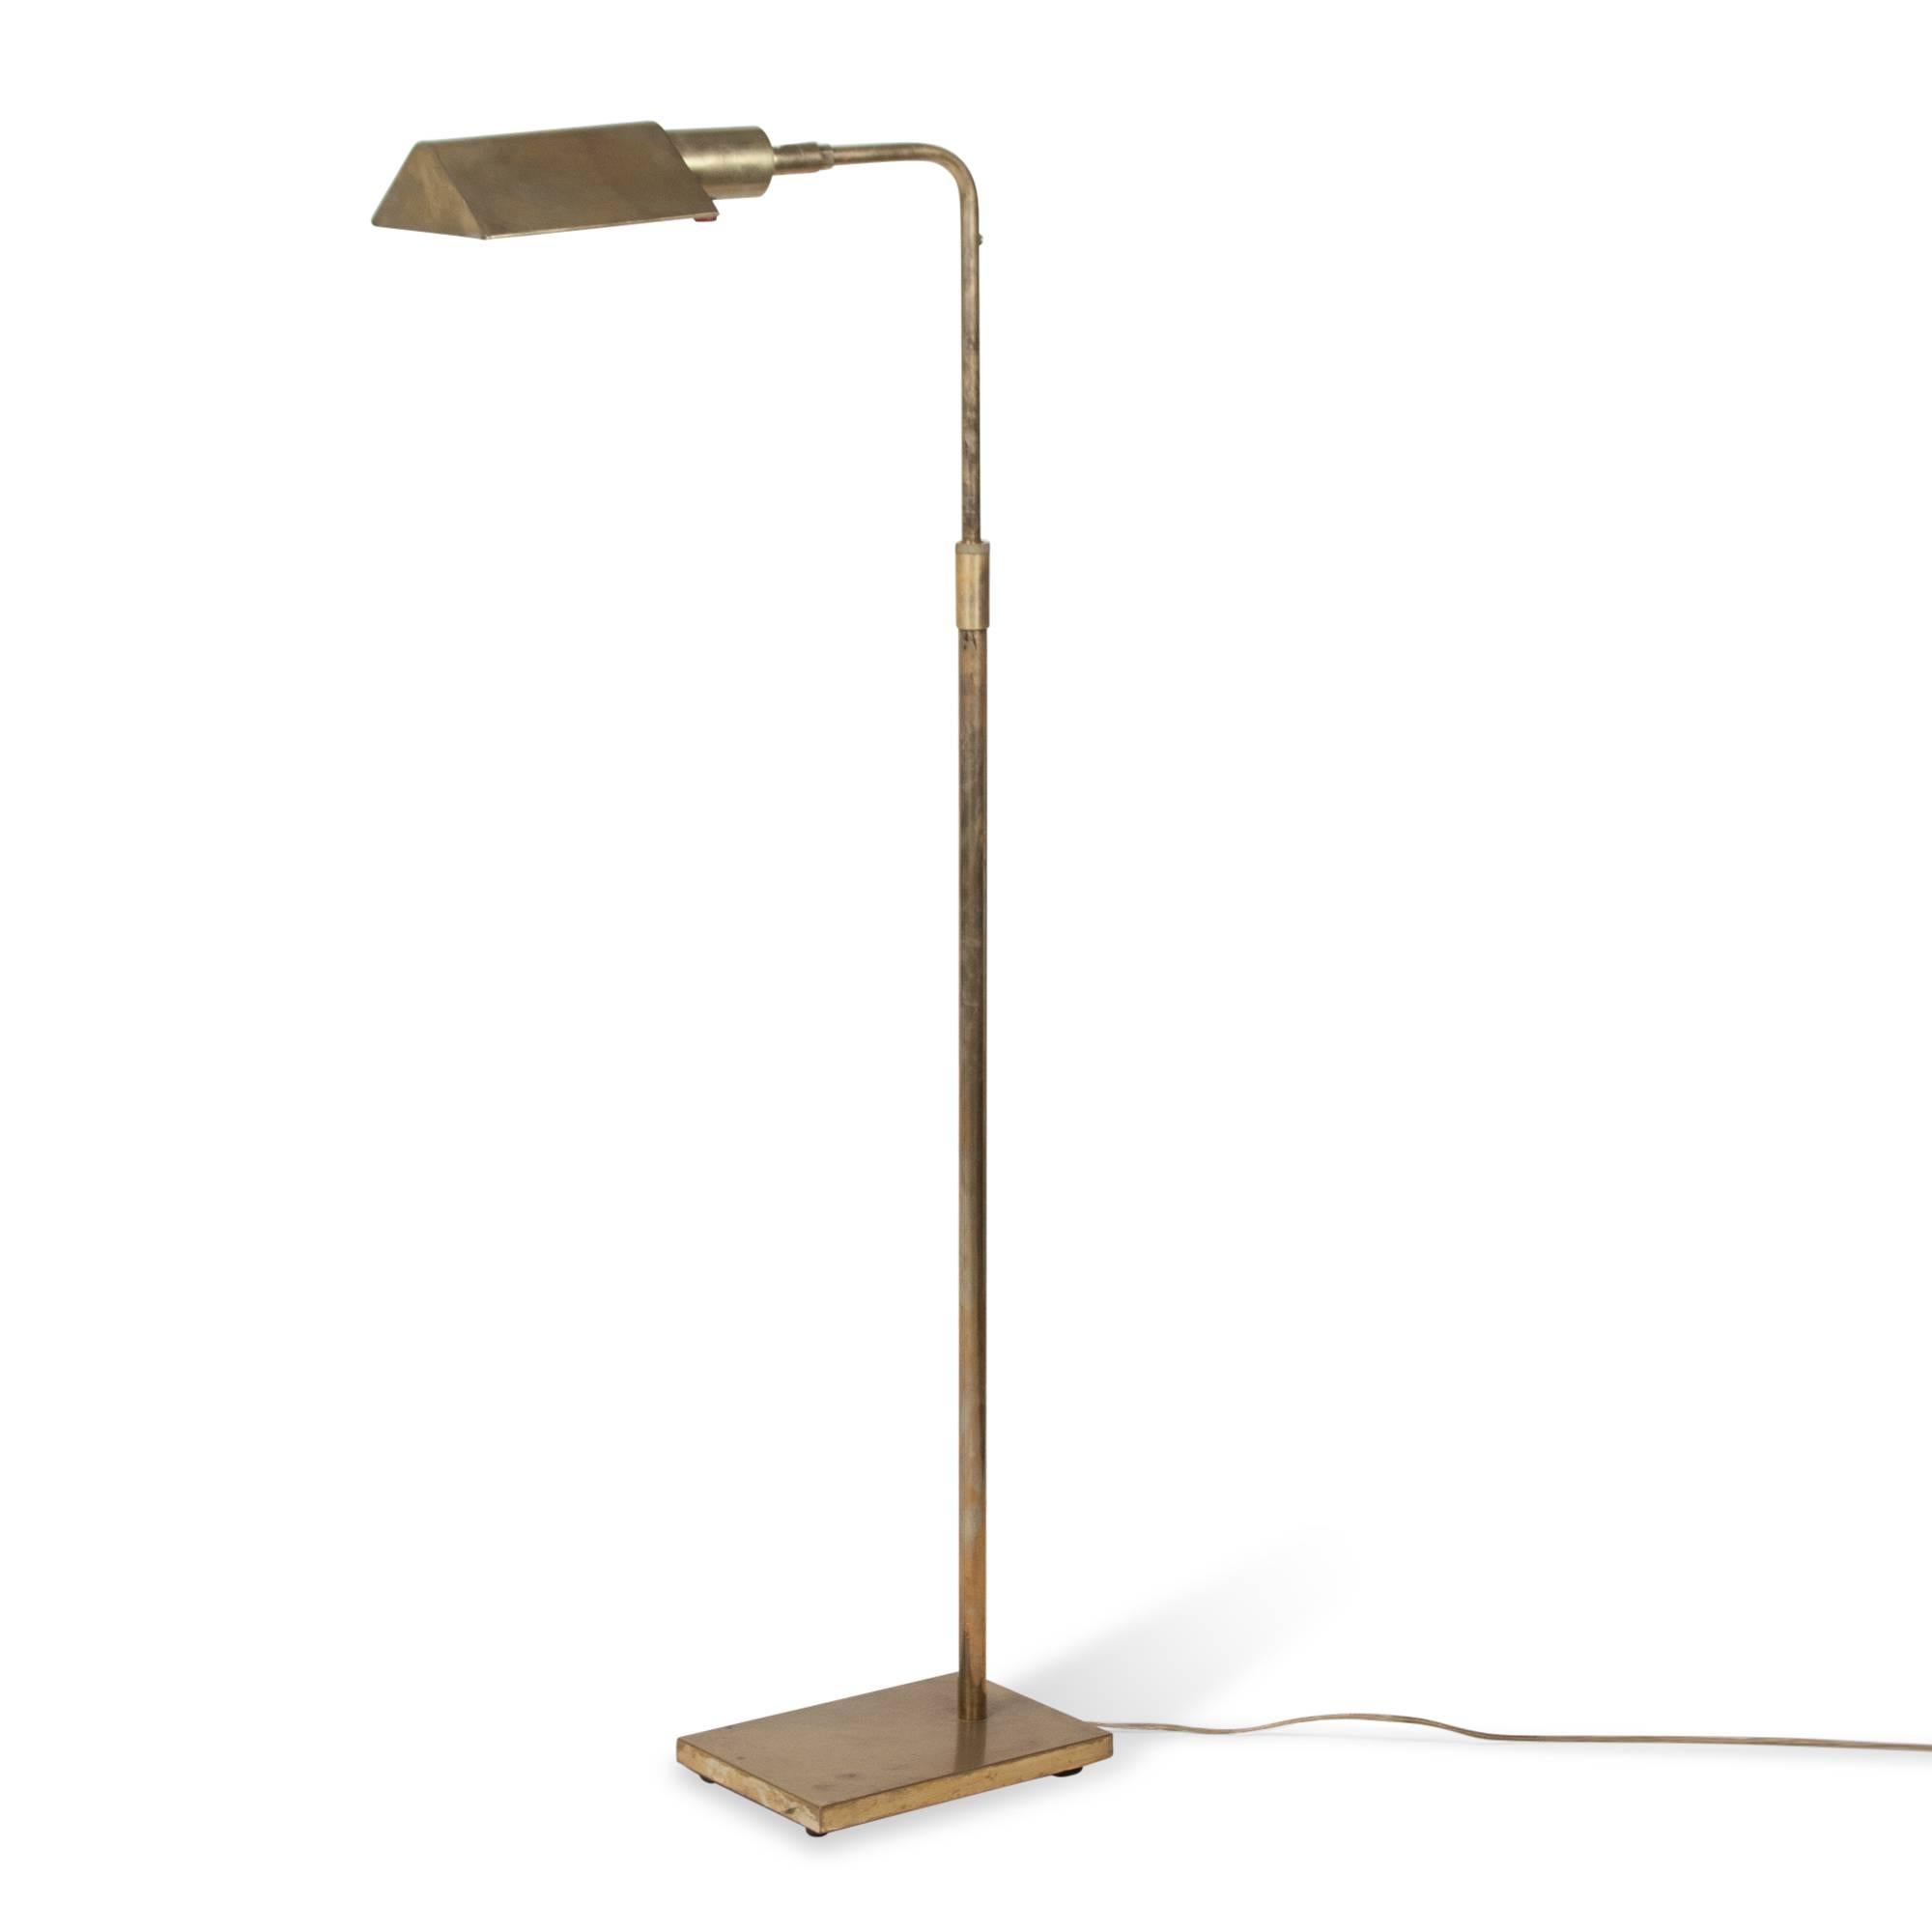 Brass reading or table lamp, the arm rotatable, of adjustable height, with rectangular base, by Koch and Lowy, United States, 1960s. Stamped signature. Overall height 41 in. Length of arm at top 15 in. Base measures 9 1/4 in x 6 1/4 in.